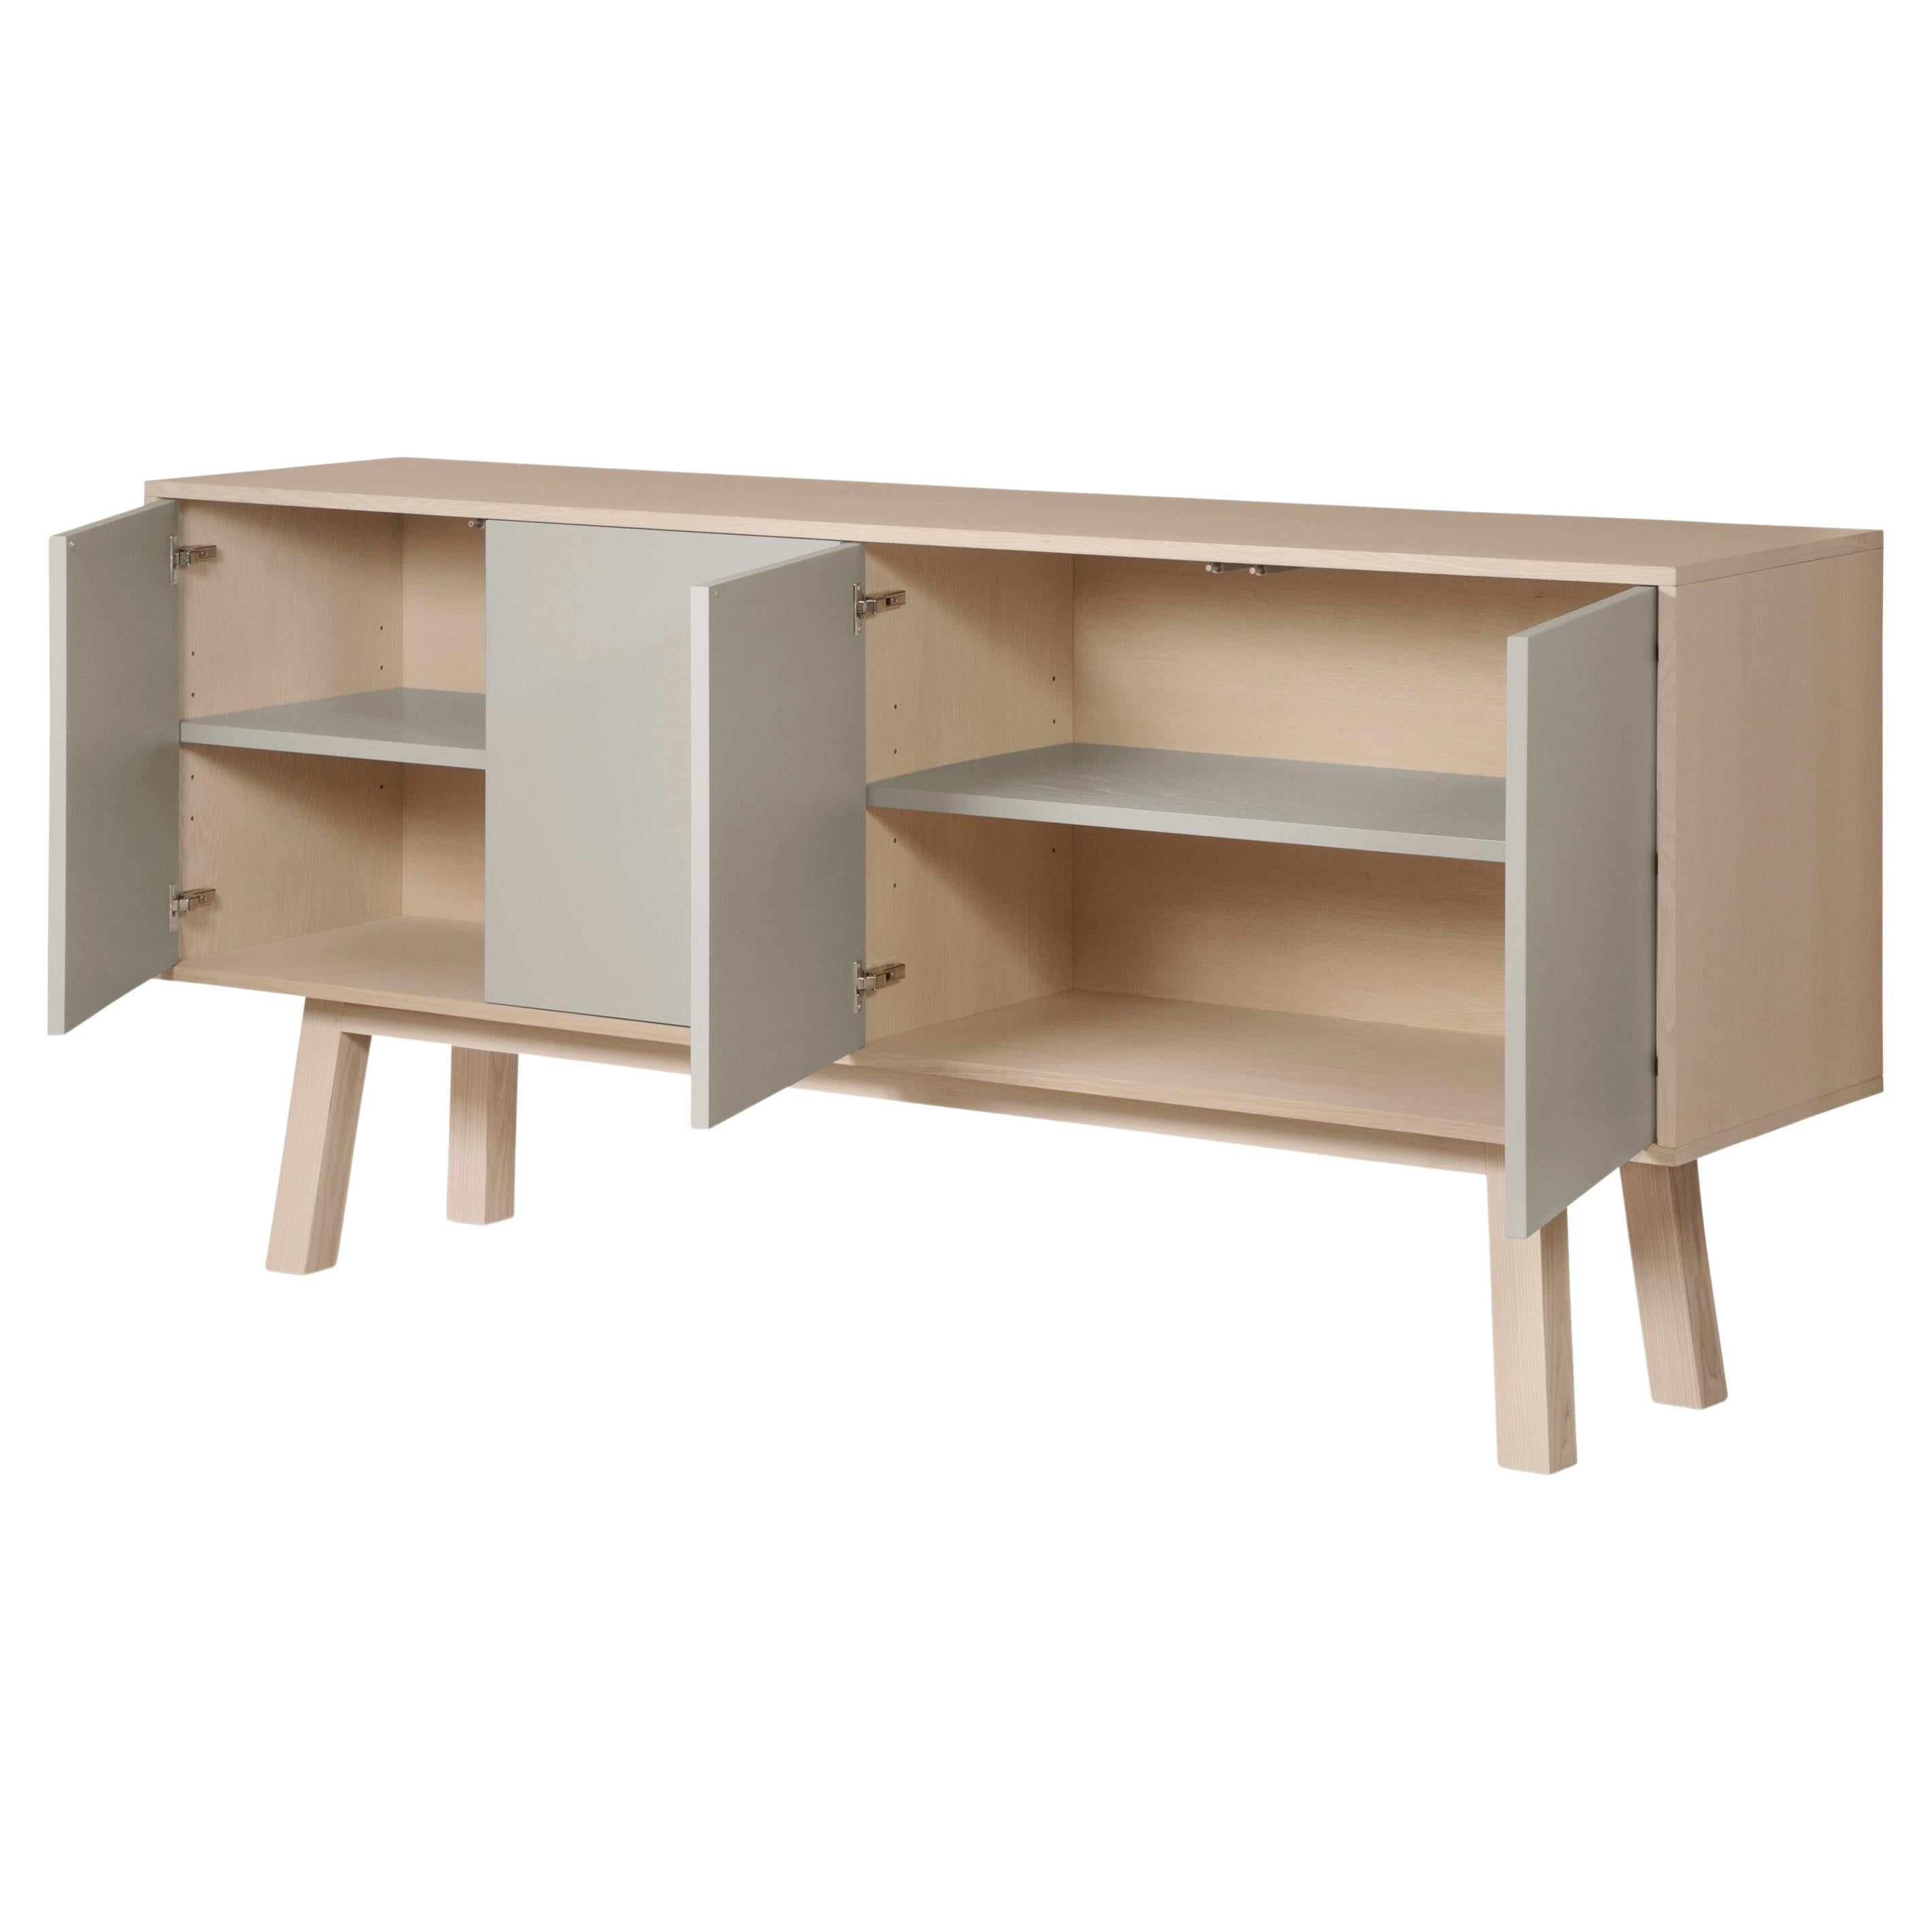 Light Grey Sideboard Kube in Wood, Design Eric Gizard, Paris Made in France For Sale